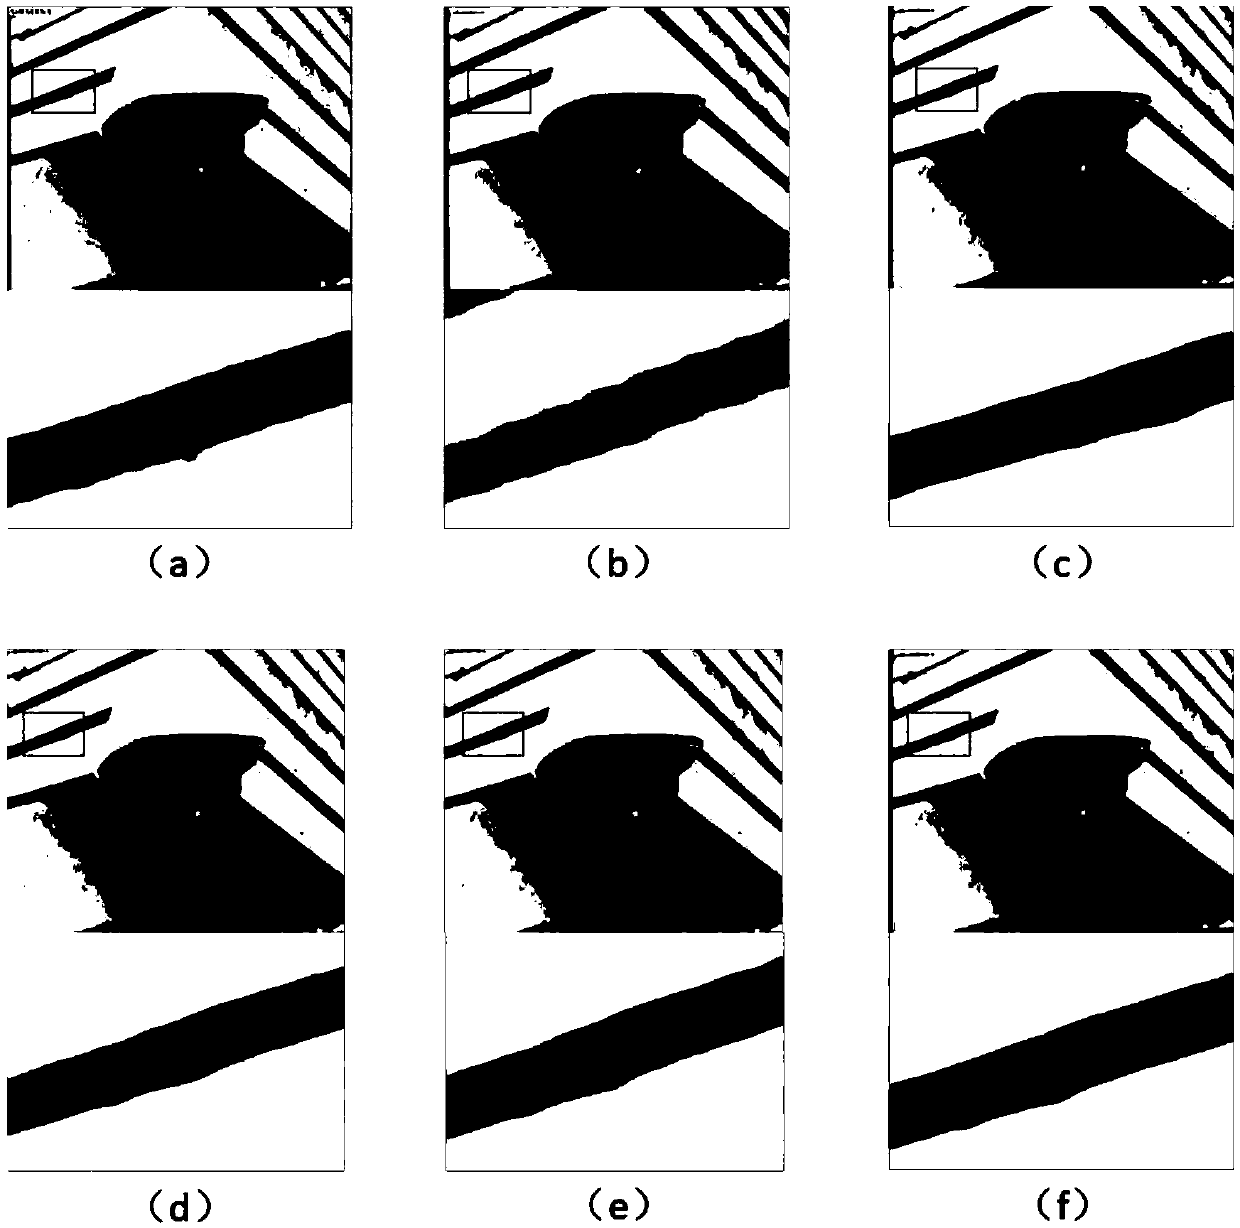 An image super-resolution reconstruction method based on wavelet coefficients learning